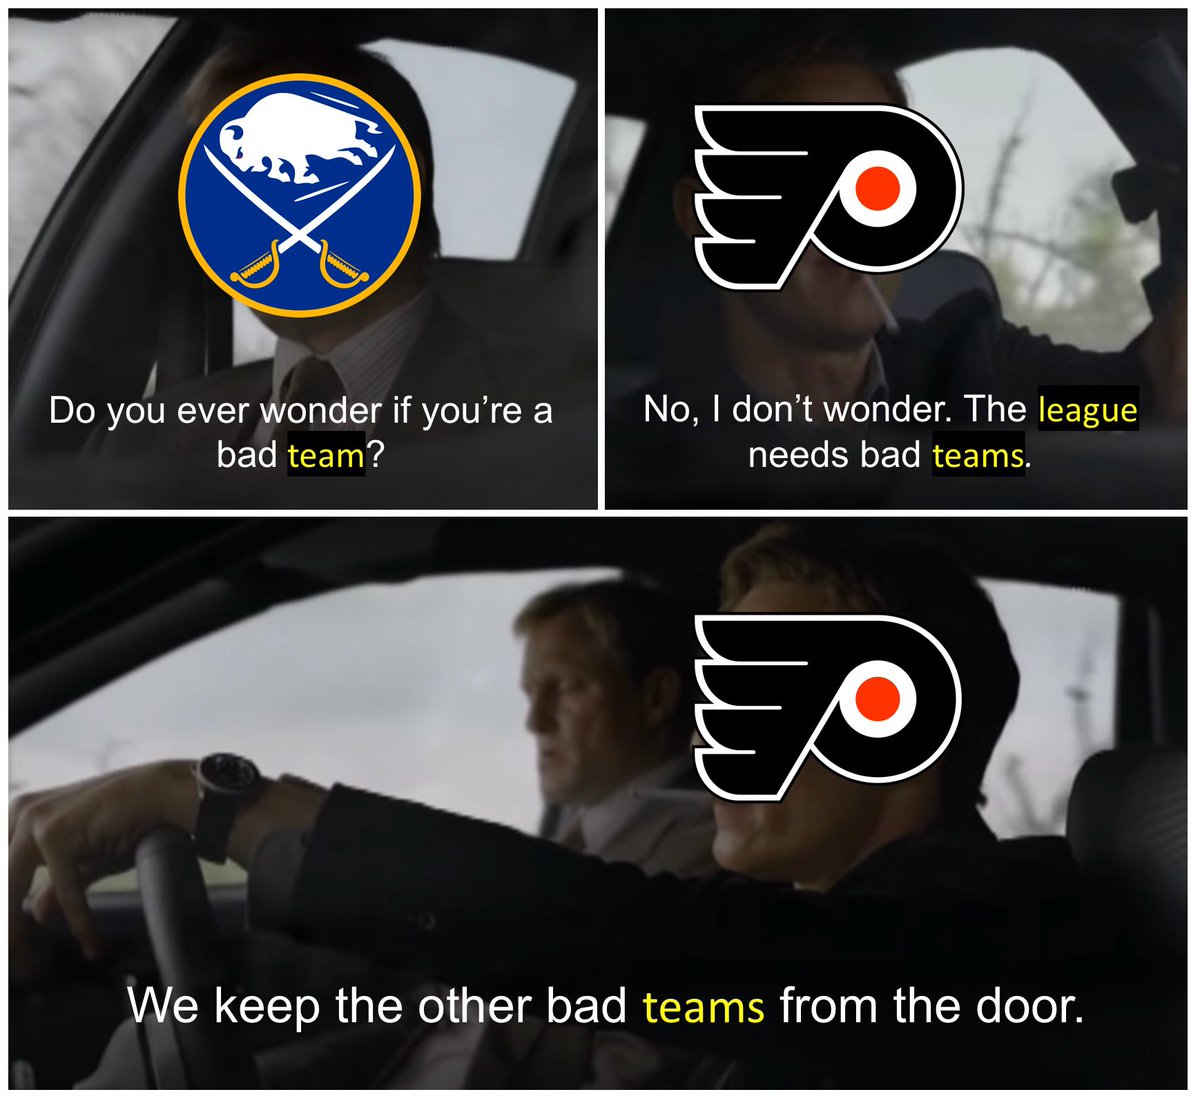 True Detective show memes - buffalo sabres - wwwww Do you ever wonder if you're a bad team? No, I don't wonder. The league needs bad teams. B We keep the other bad teams from the door.